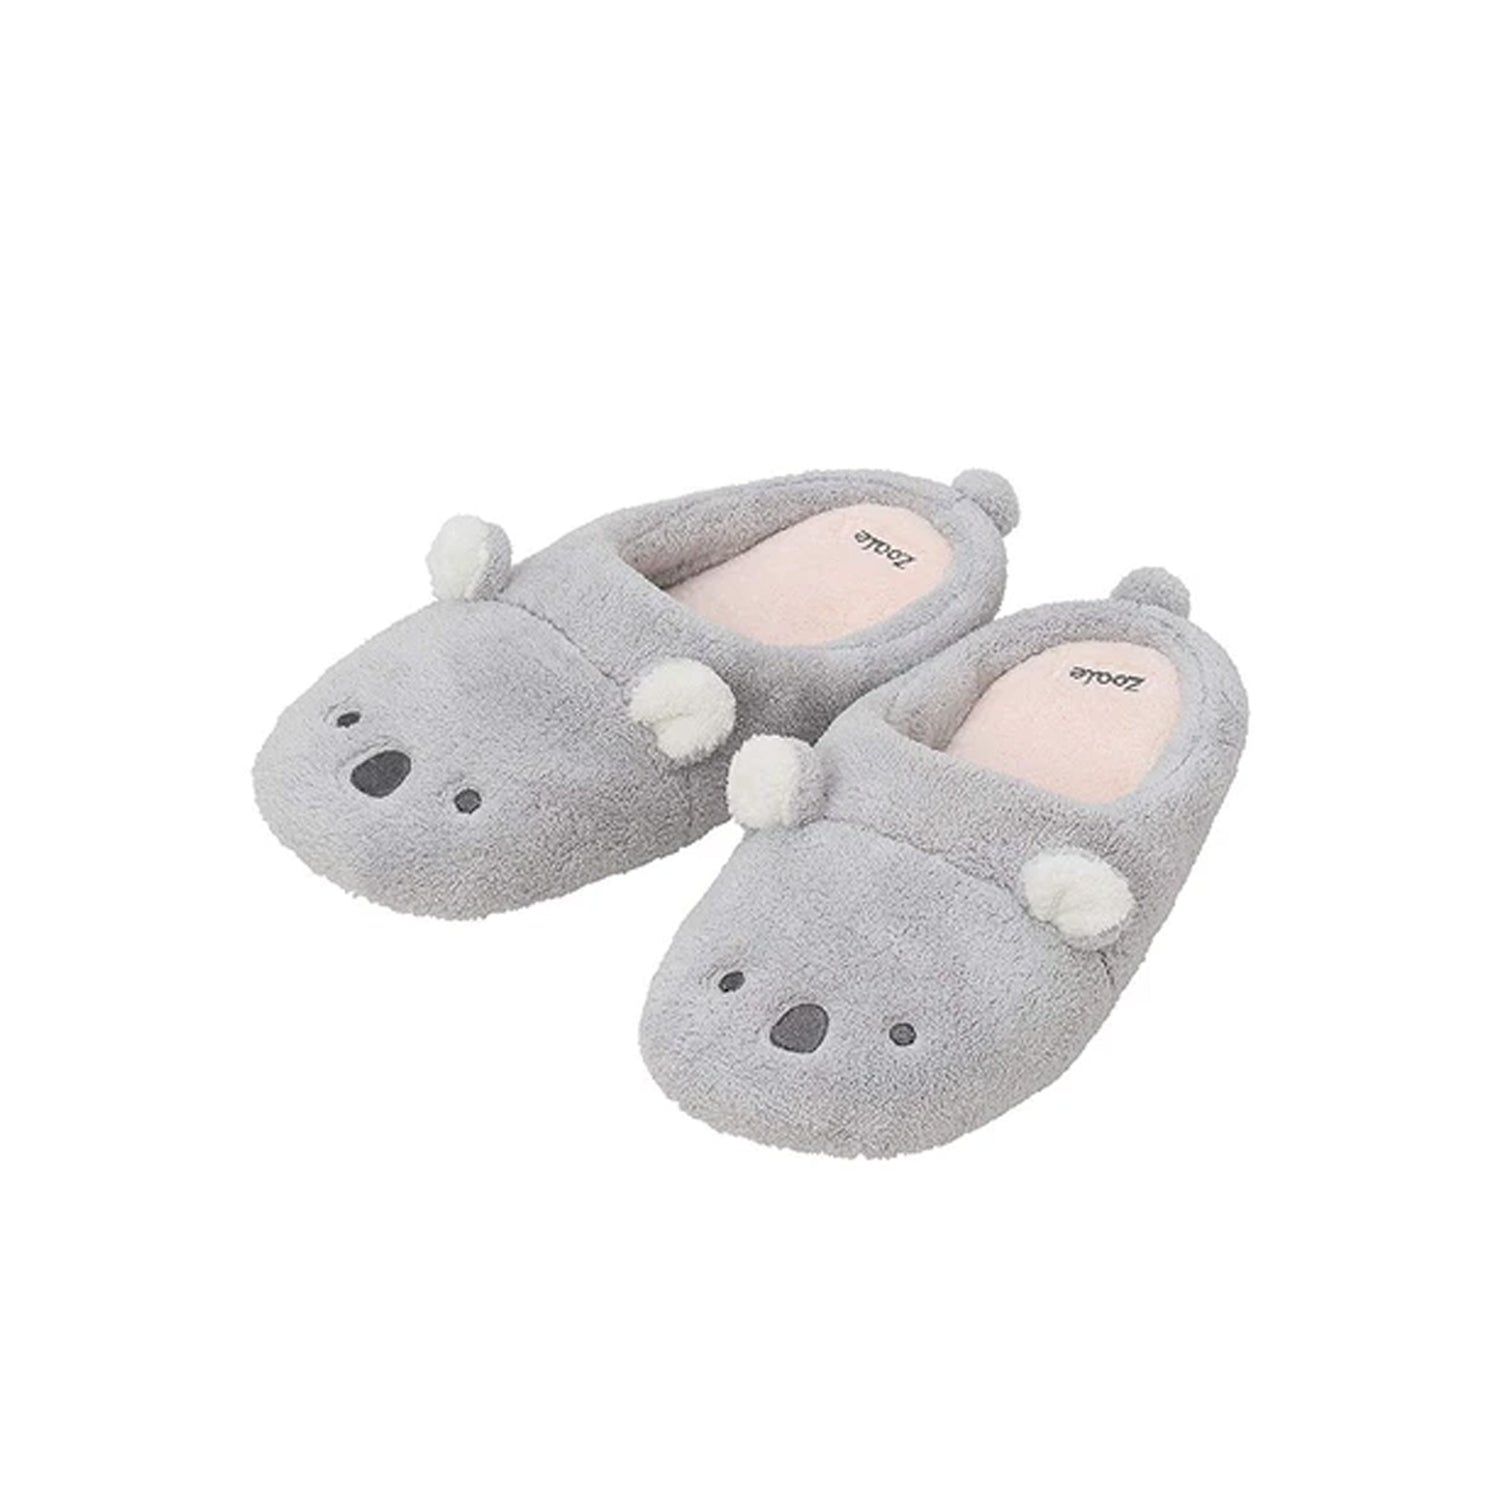 CARARI ZOOIE Fluffy Home Slippers 1pairs